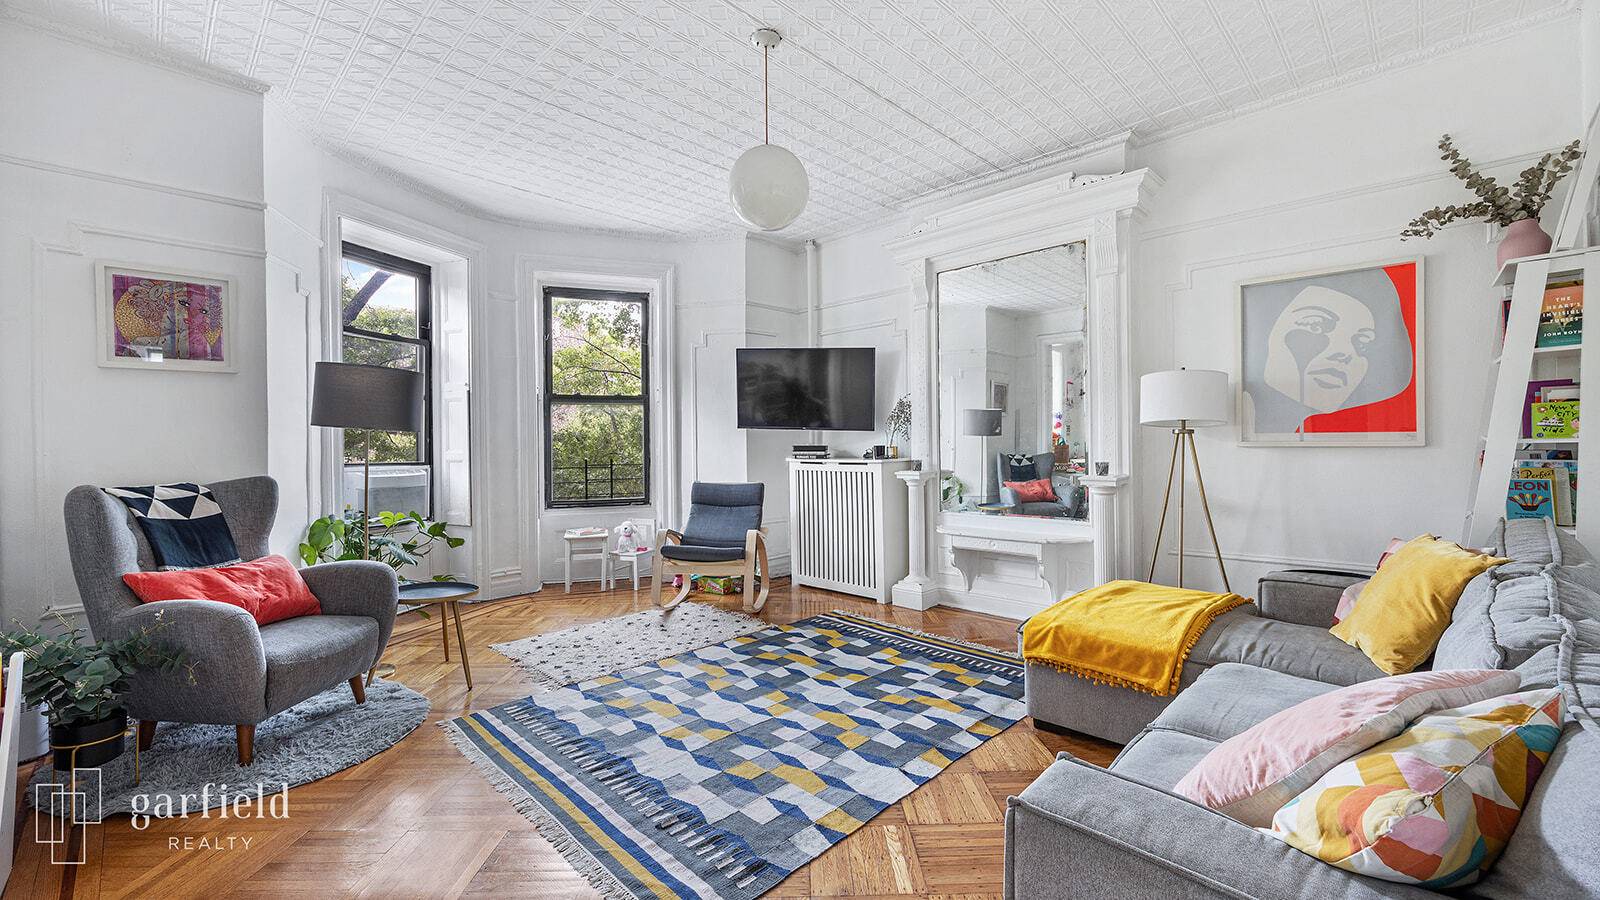 Exquisite historic details mingle with modern upgrades at this expansive, sun filled 14BR 7BA four family brownstone complete with a verdant backyard and income generating opportunities.